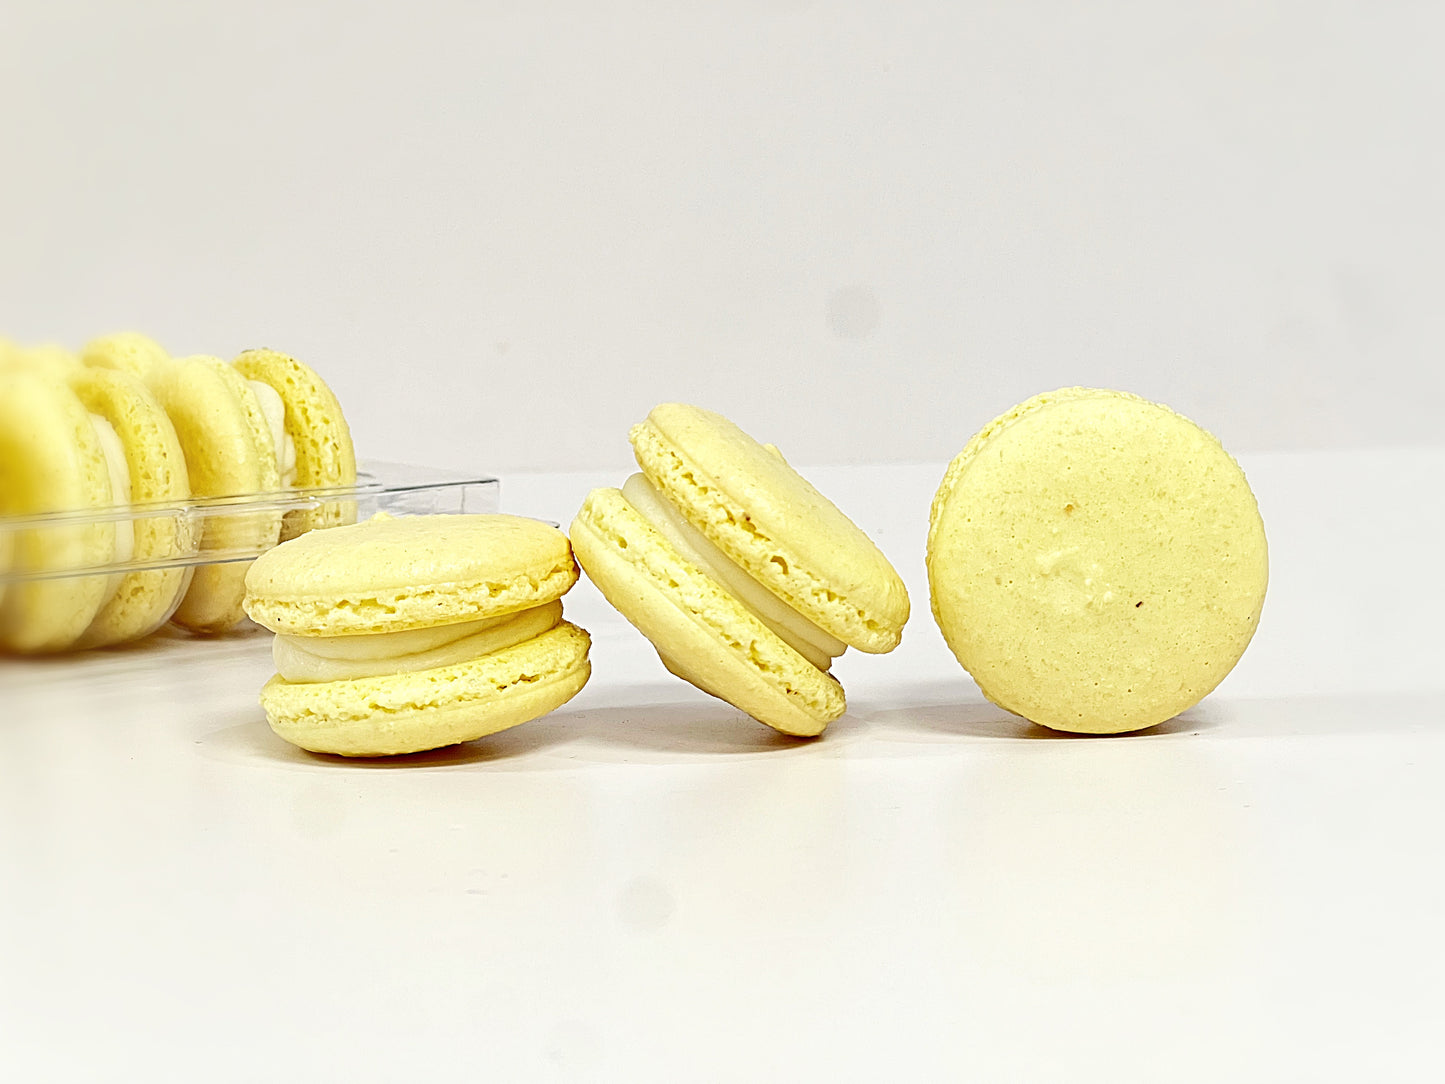 6 Pack Pineapple Caramel French macarons